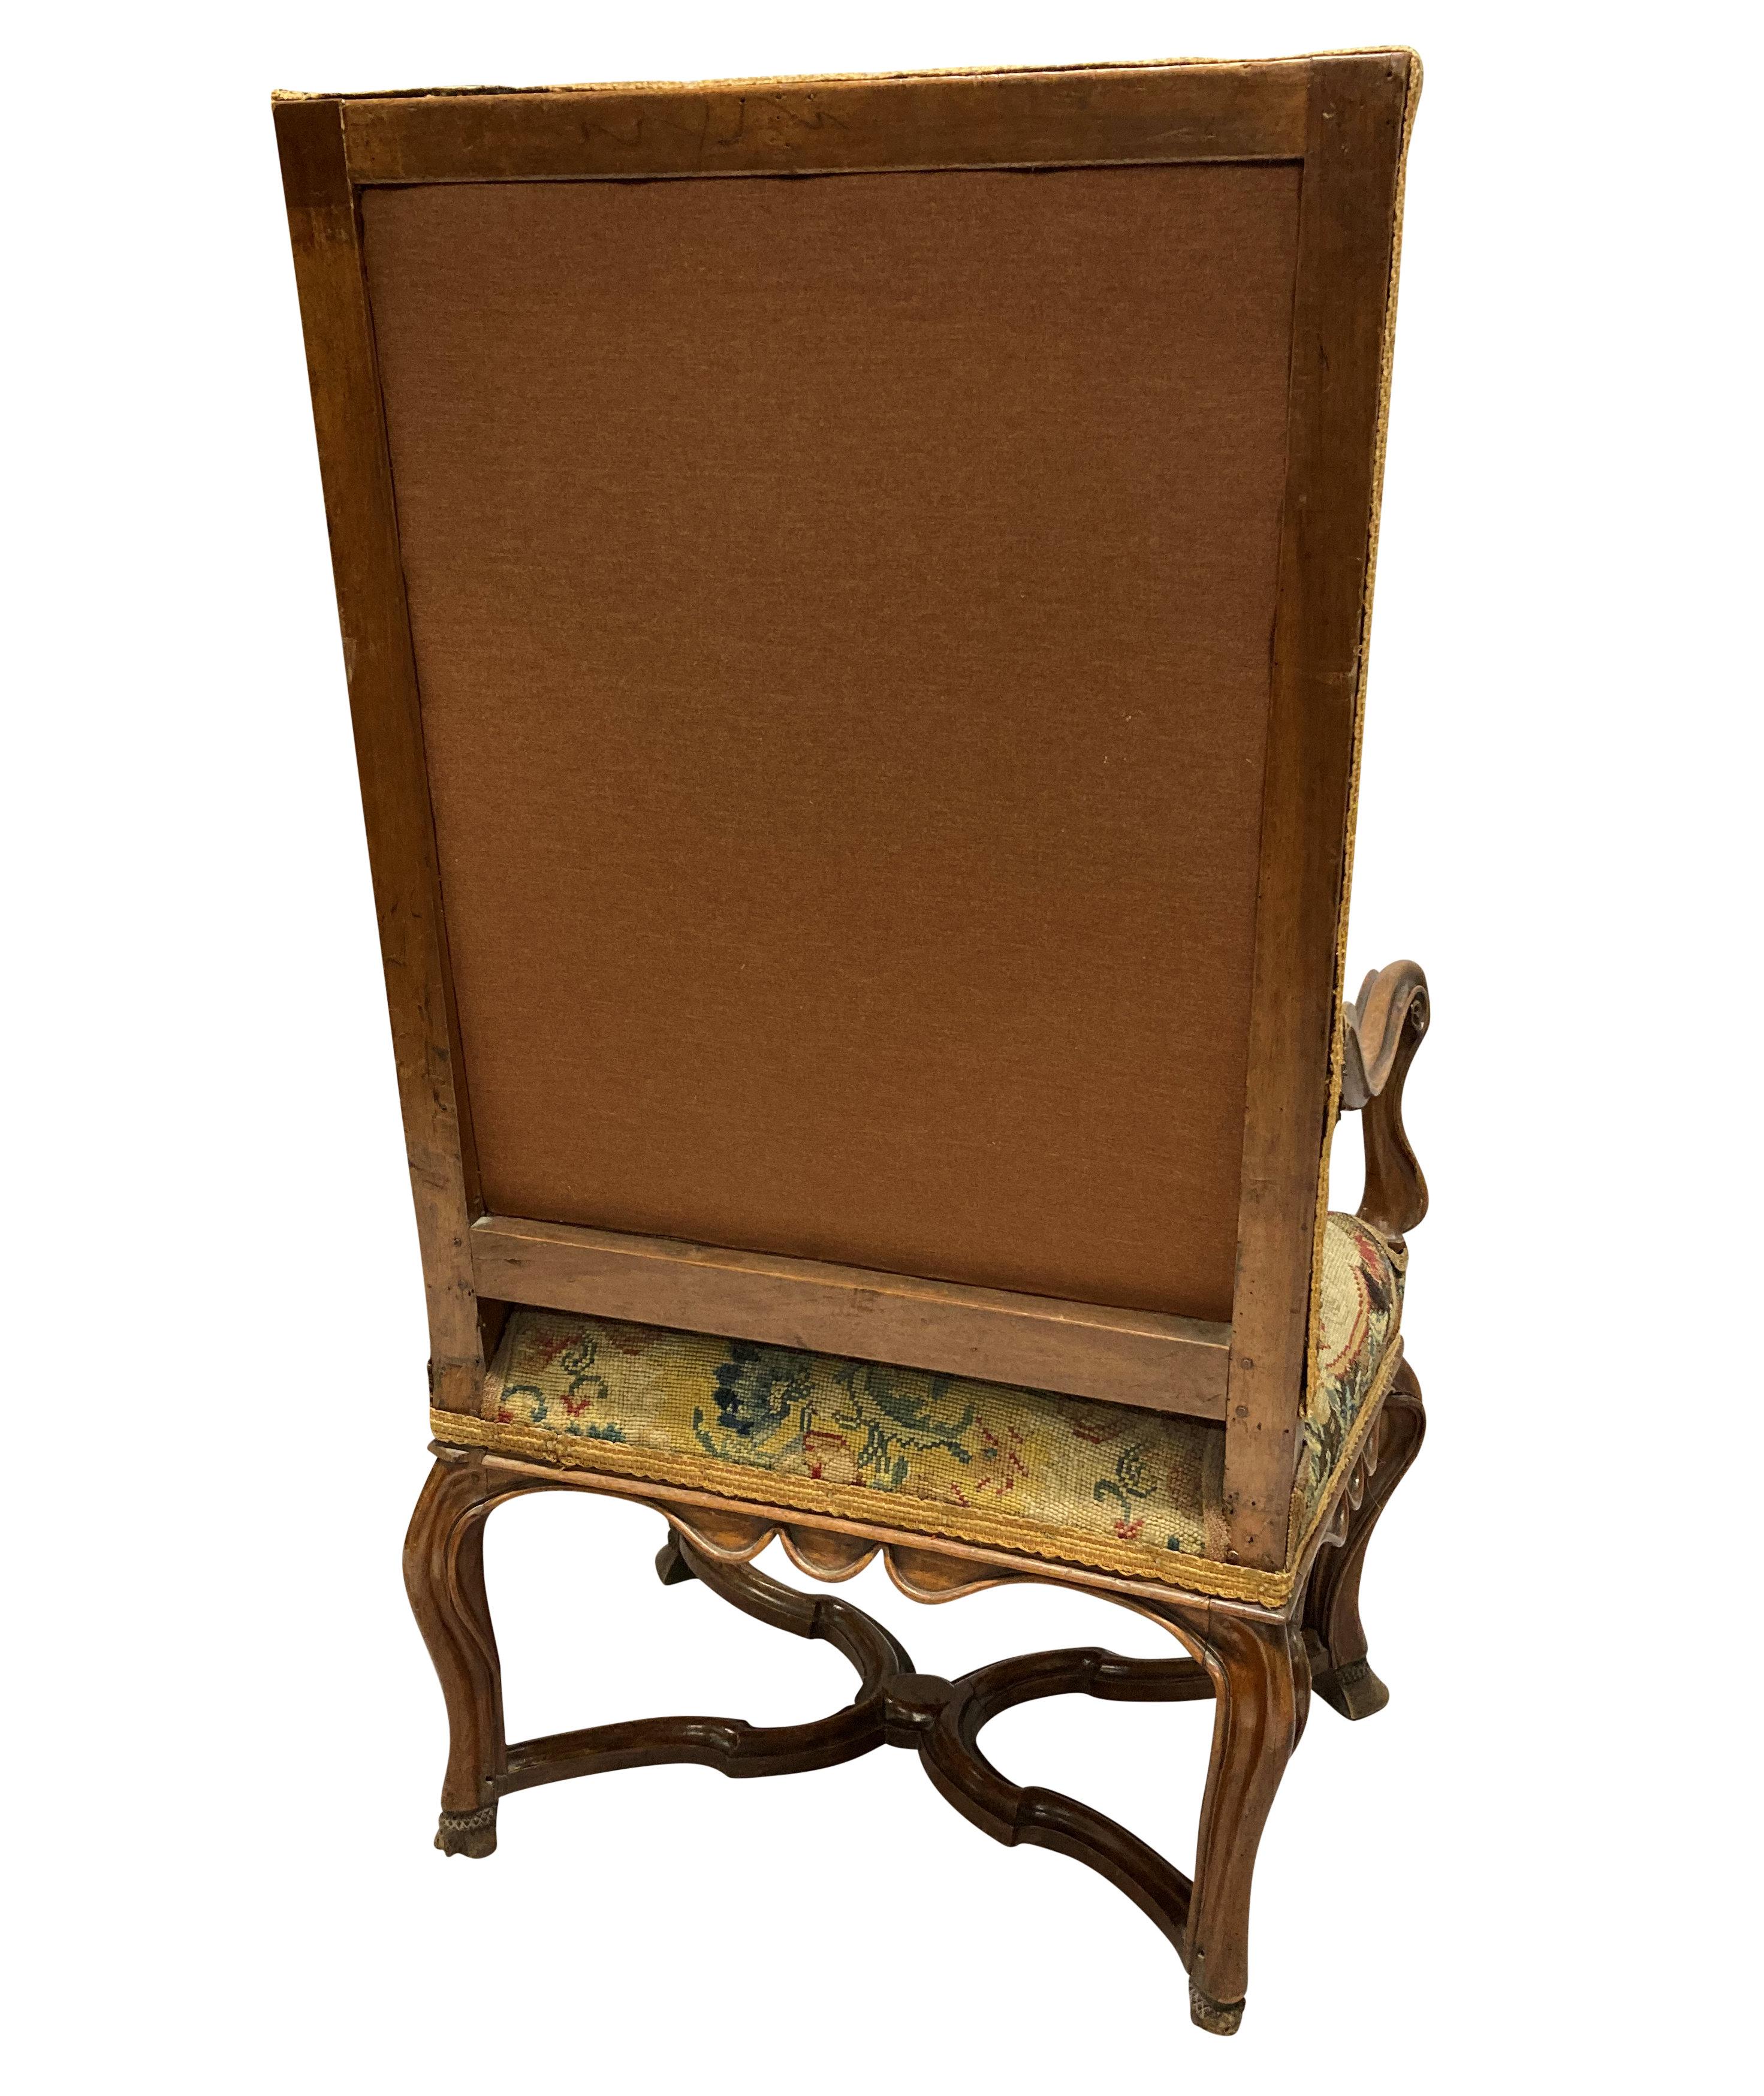 Walnut William & Mary Armchair Covered in a Fine Needlepoint Tapestry